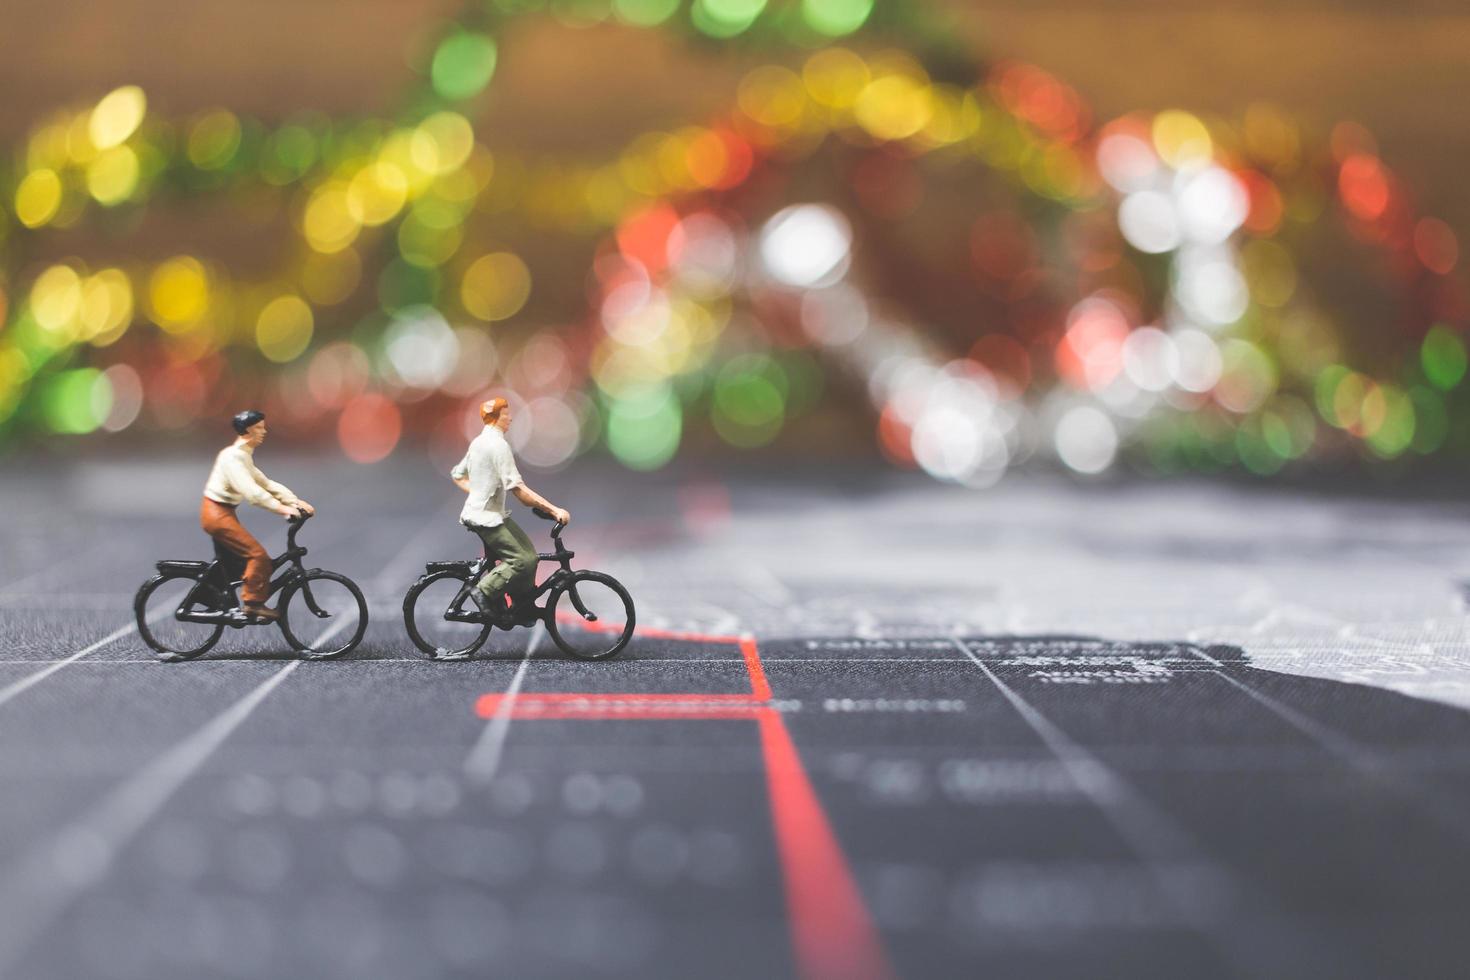 Miniature travelers riding a bicycle on a world map, traveling and exploring the world concept photo